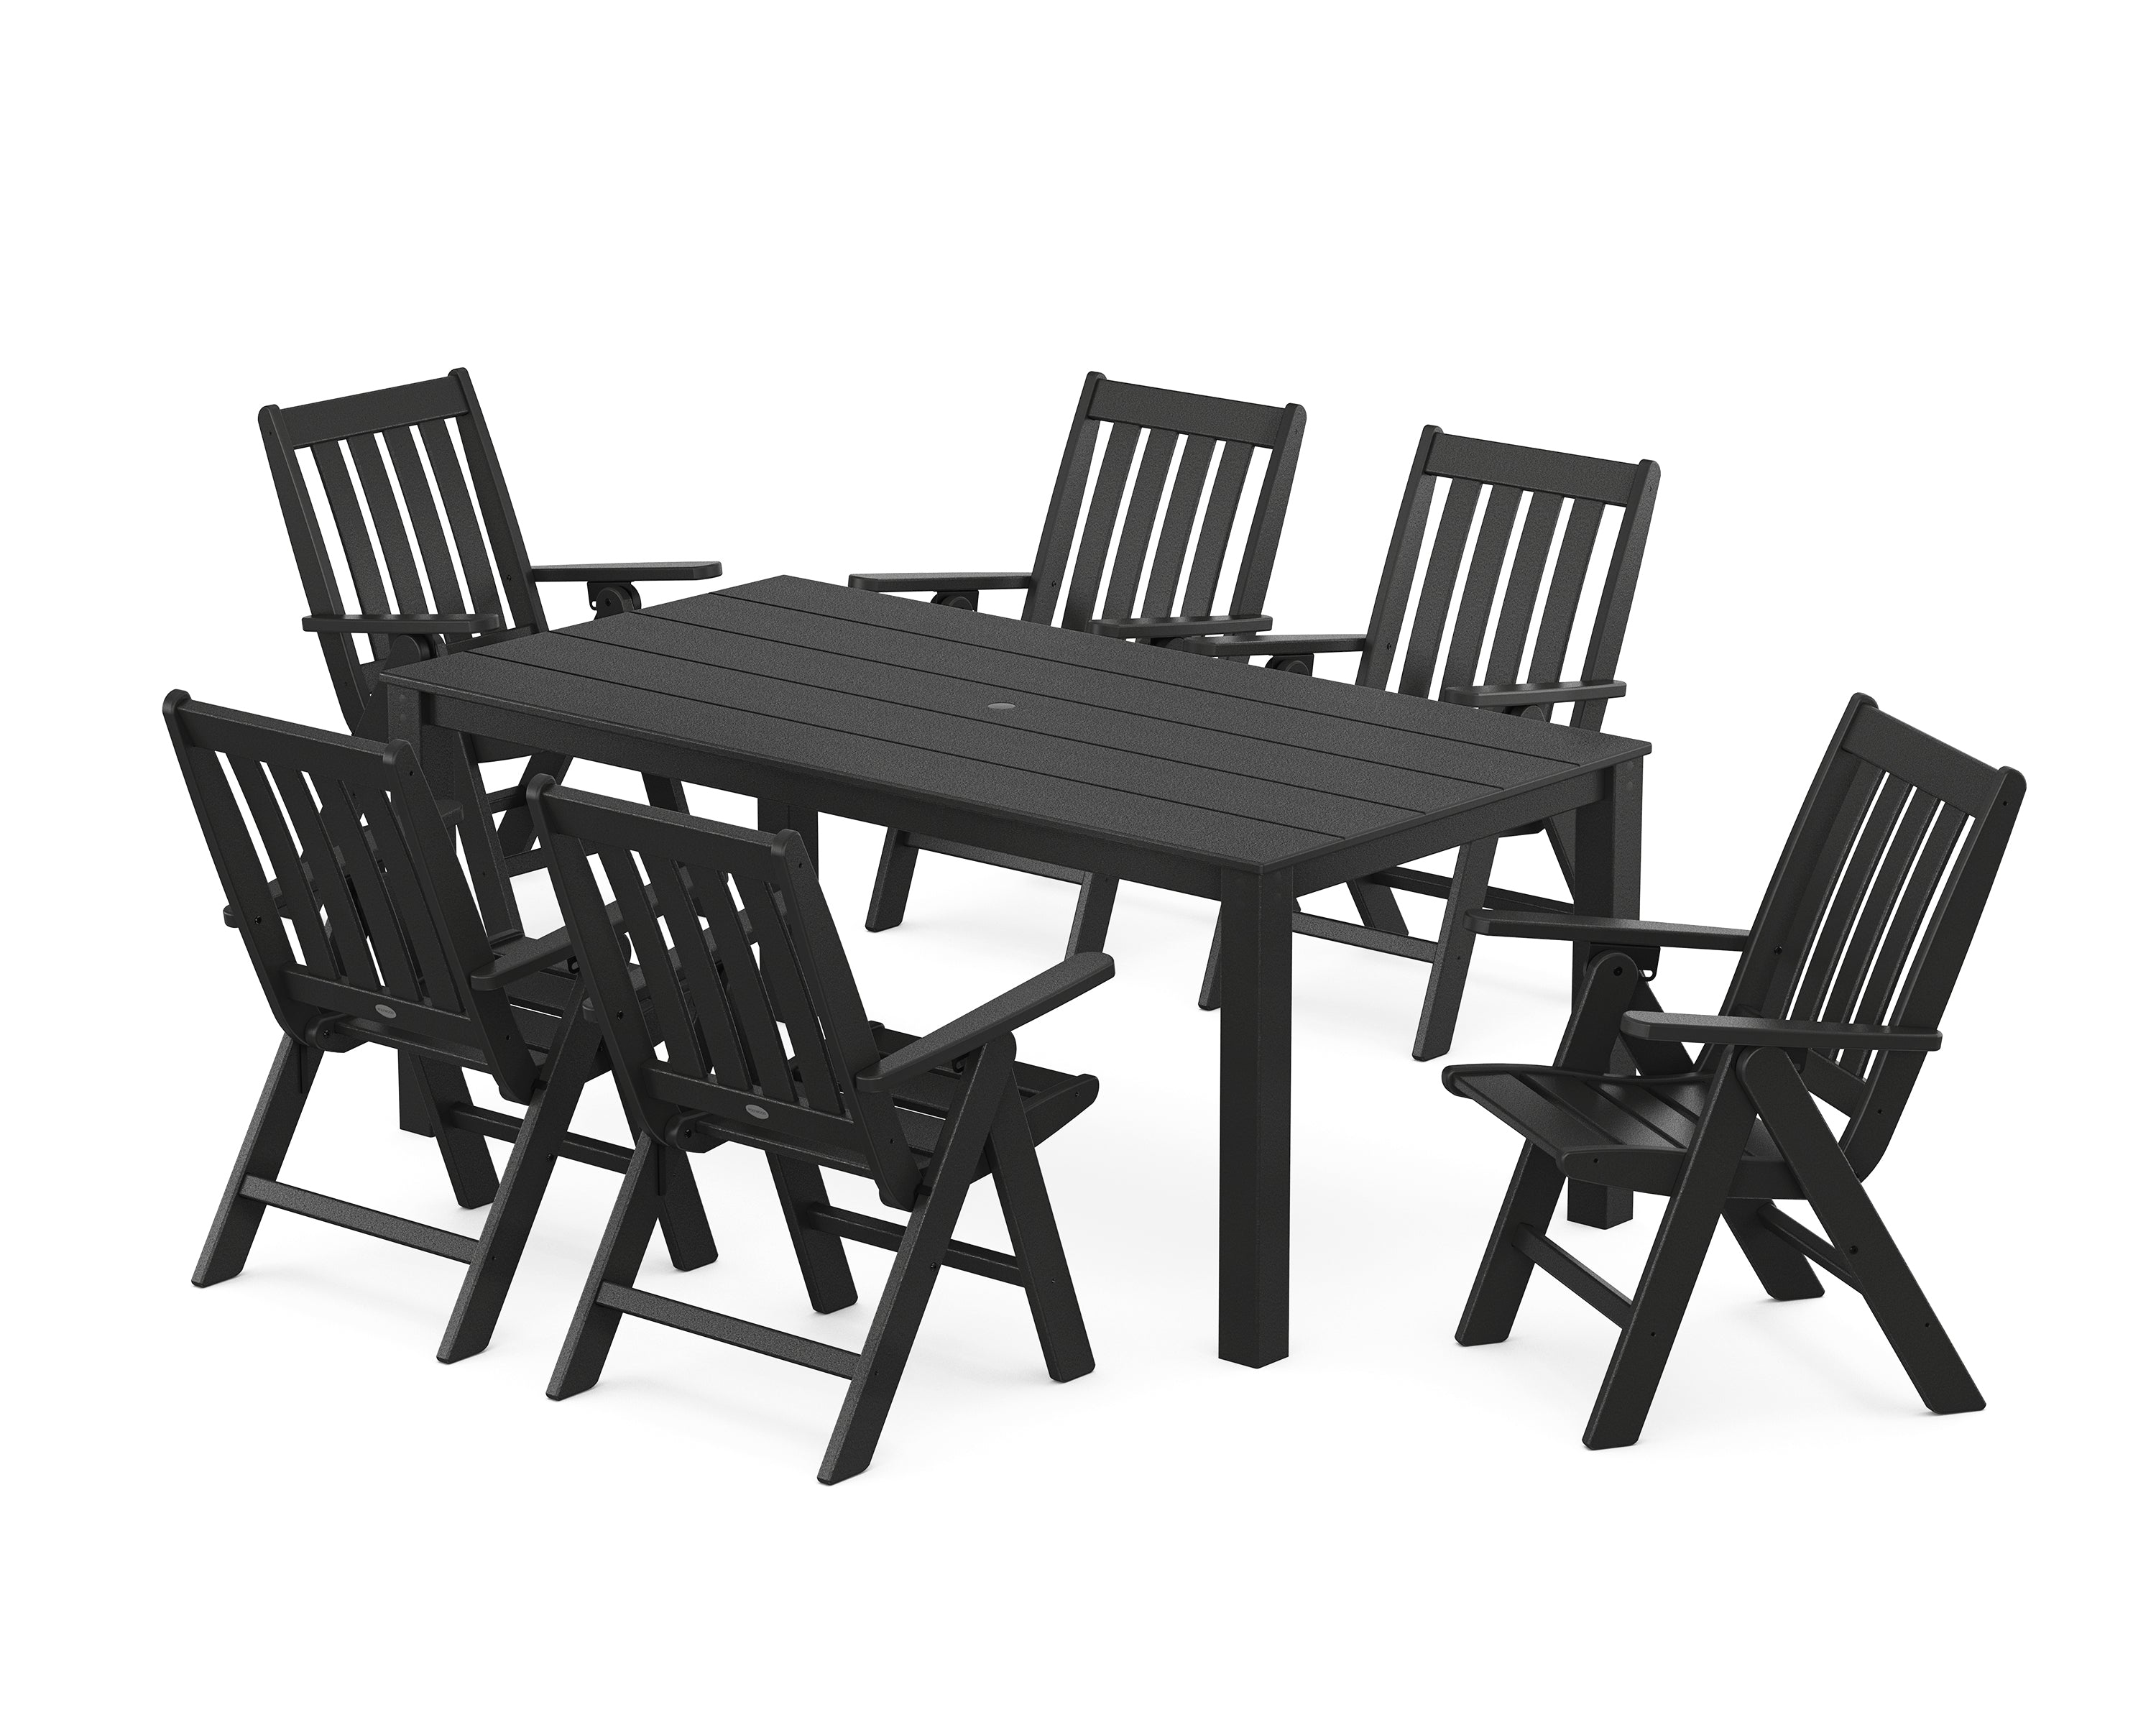 POLYWOOD® Vineyard Folding Chair 7-Piece Parsons Dining Set in Black